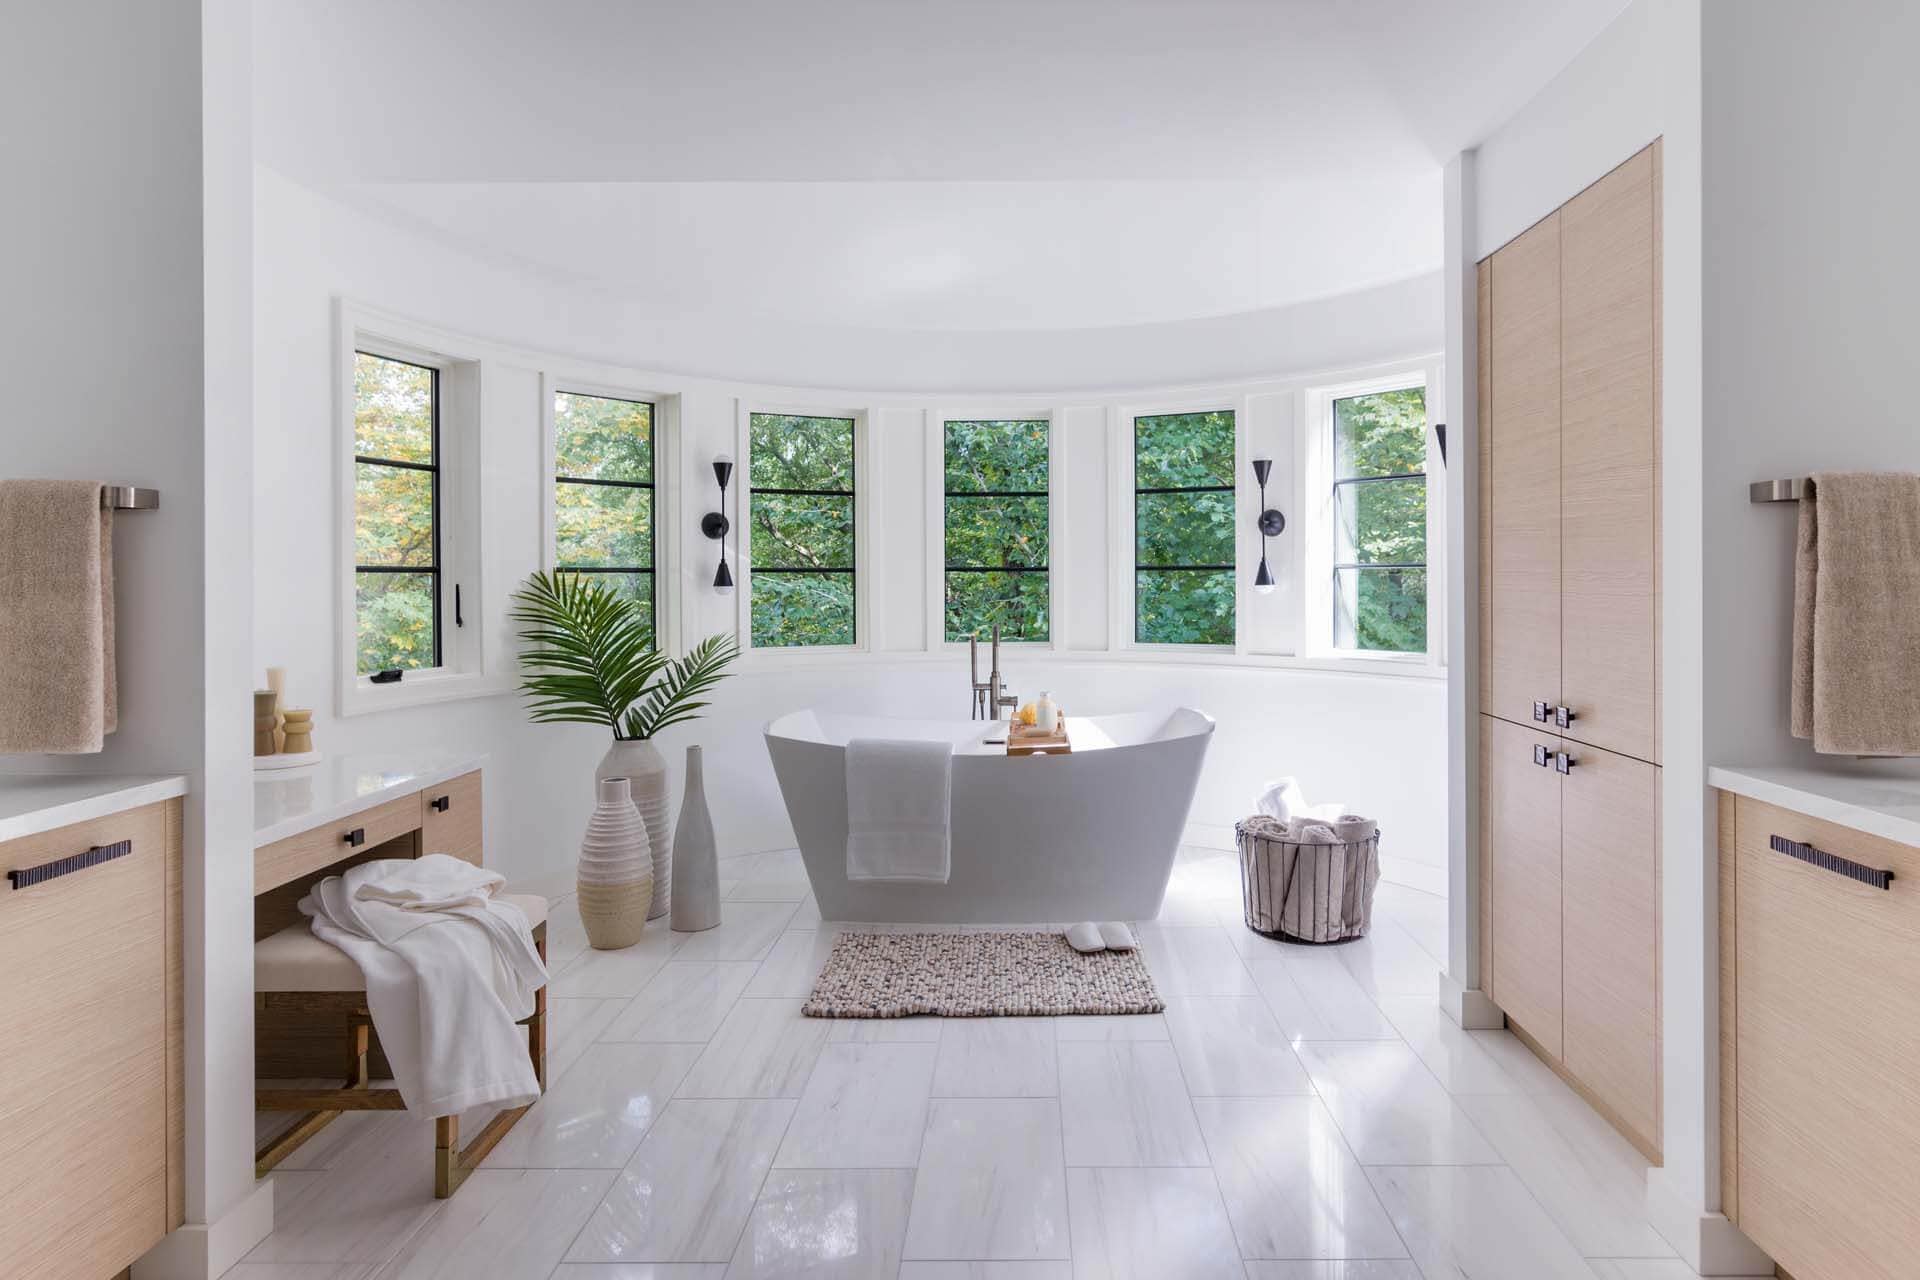 Contemporary spa bathroom features a large bay of windows, pale oak cabinetry, light dolomite tiles and soaking tub.